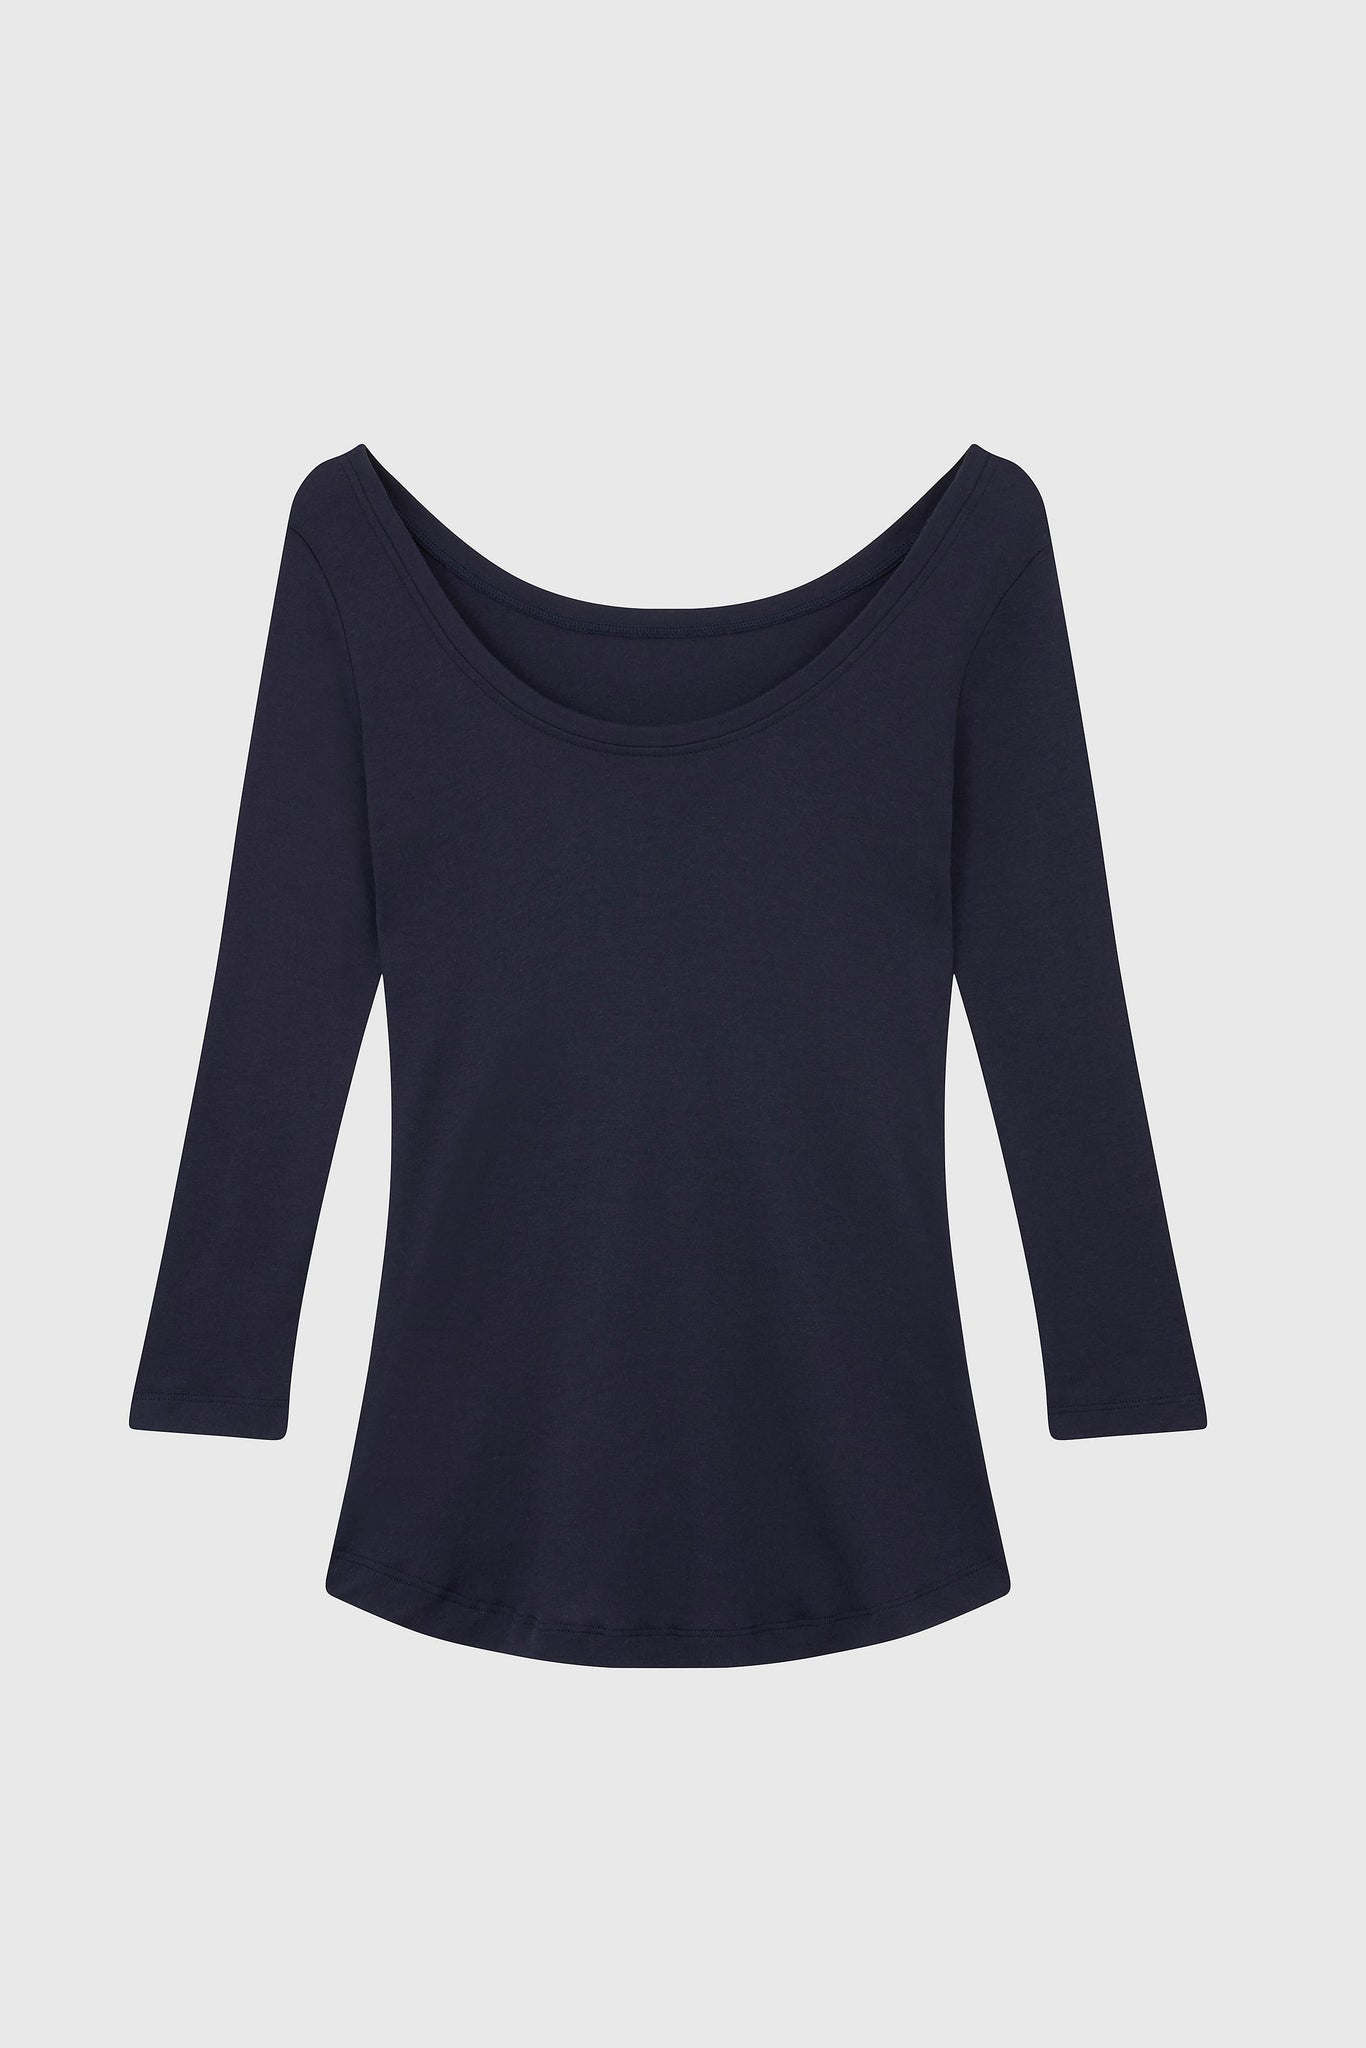 Women's Navy 3/4 Sleeve Boat Neck Cotton Modal Blend T-Shirt by Lavender Hill Clothing